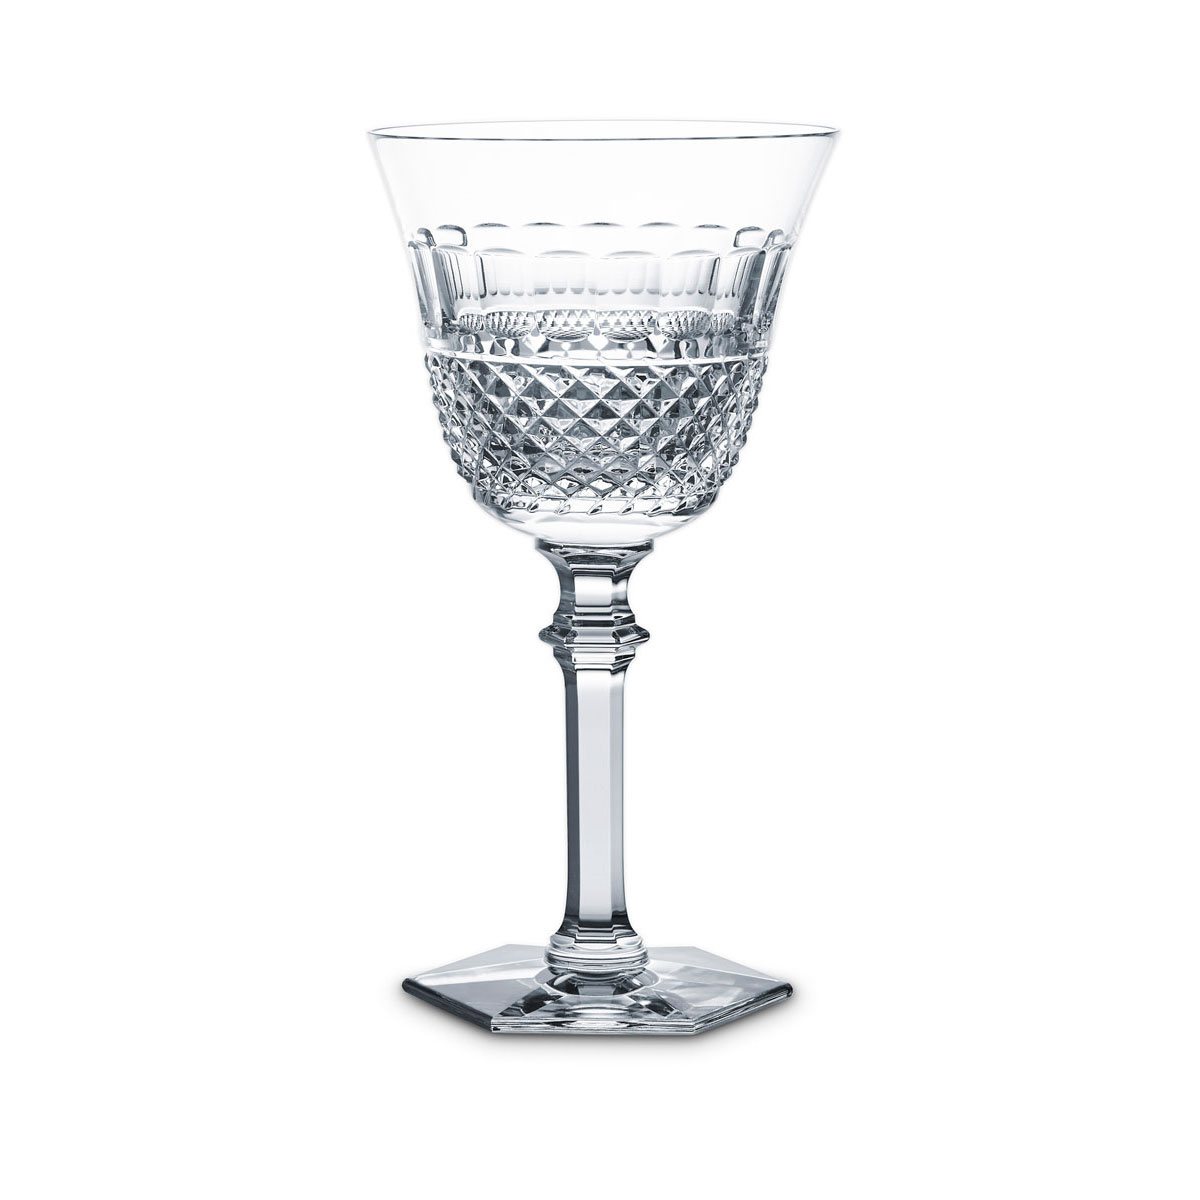 Baccarat Crystal, Diamant Water Crystal Goblet No. 1 Glass, Single